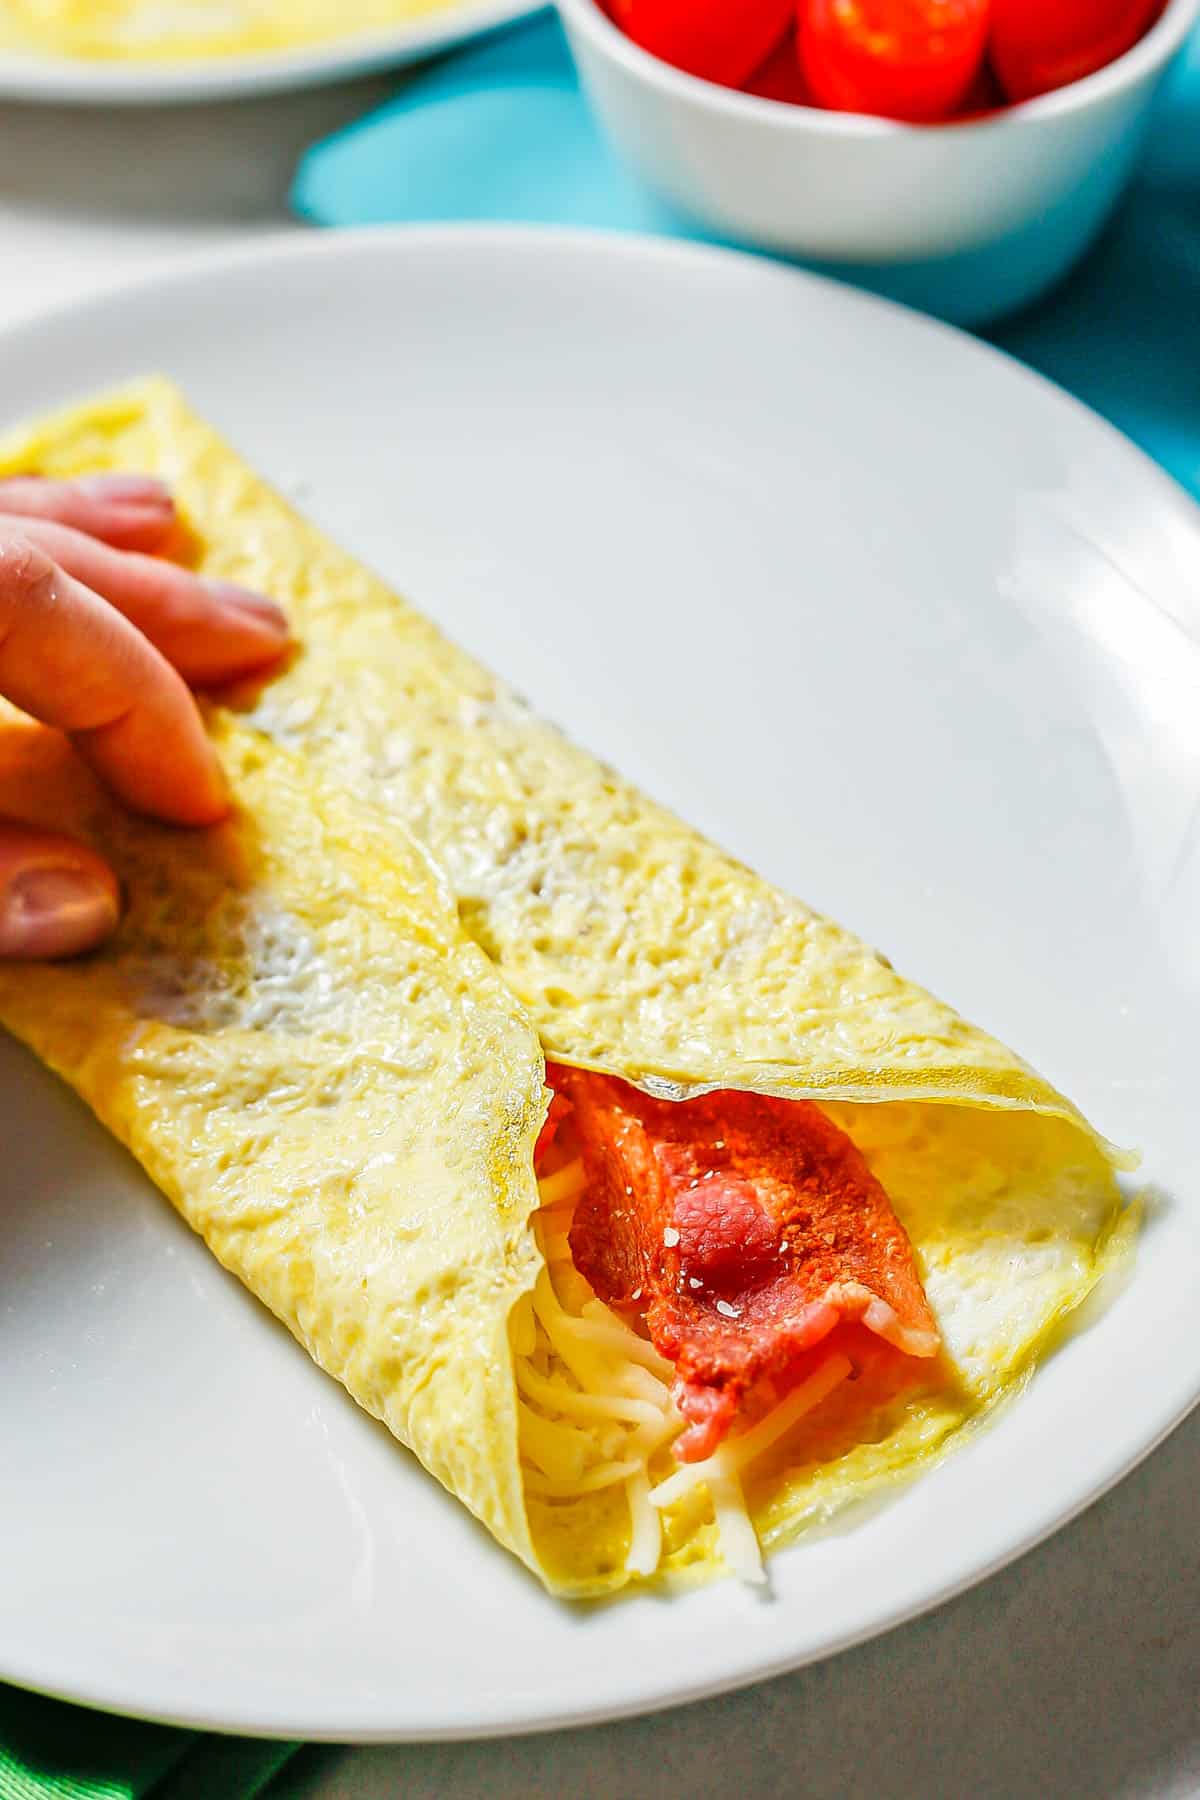 A hand holding a folded over egg wrap with cheese and bacon on the inside.